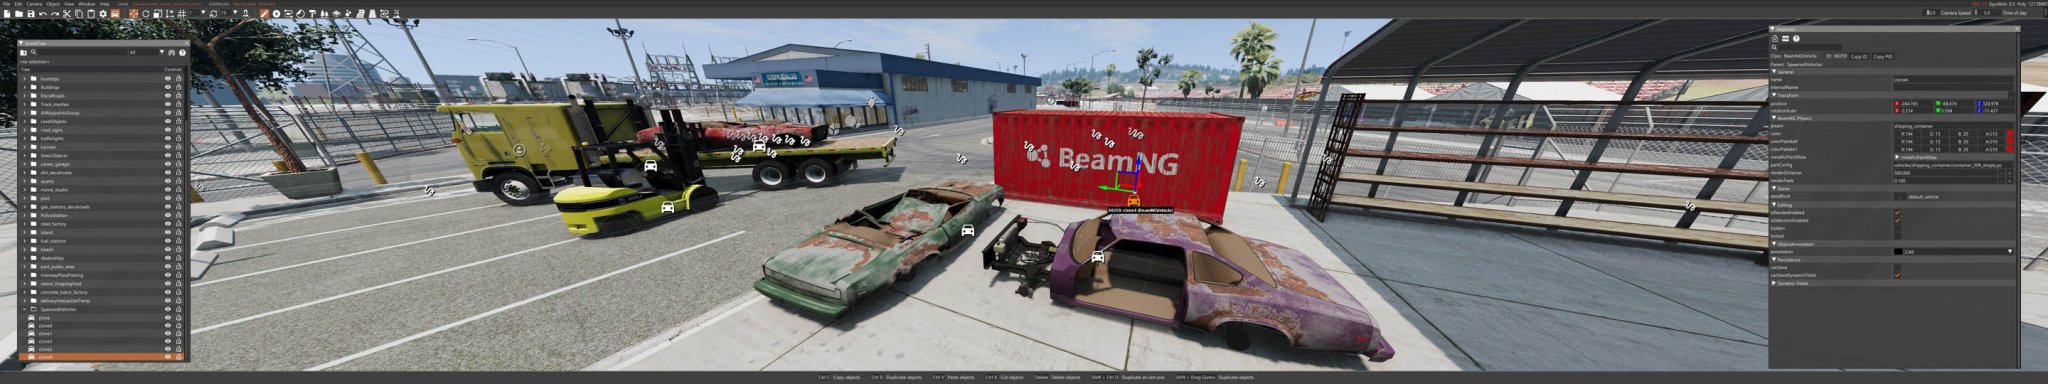 5 BeamNG CRUSHED CARS to HOT ROLLED Inc STEEL copy.jpg